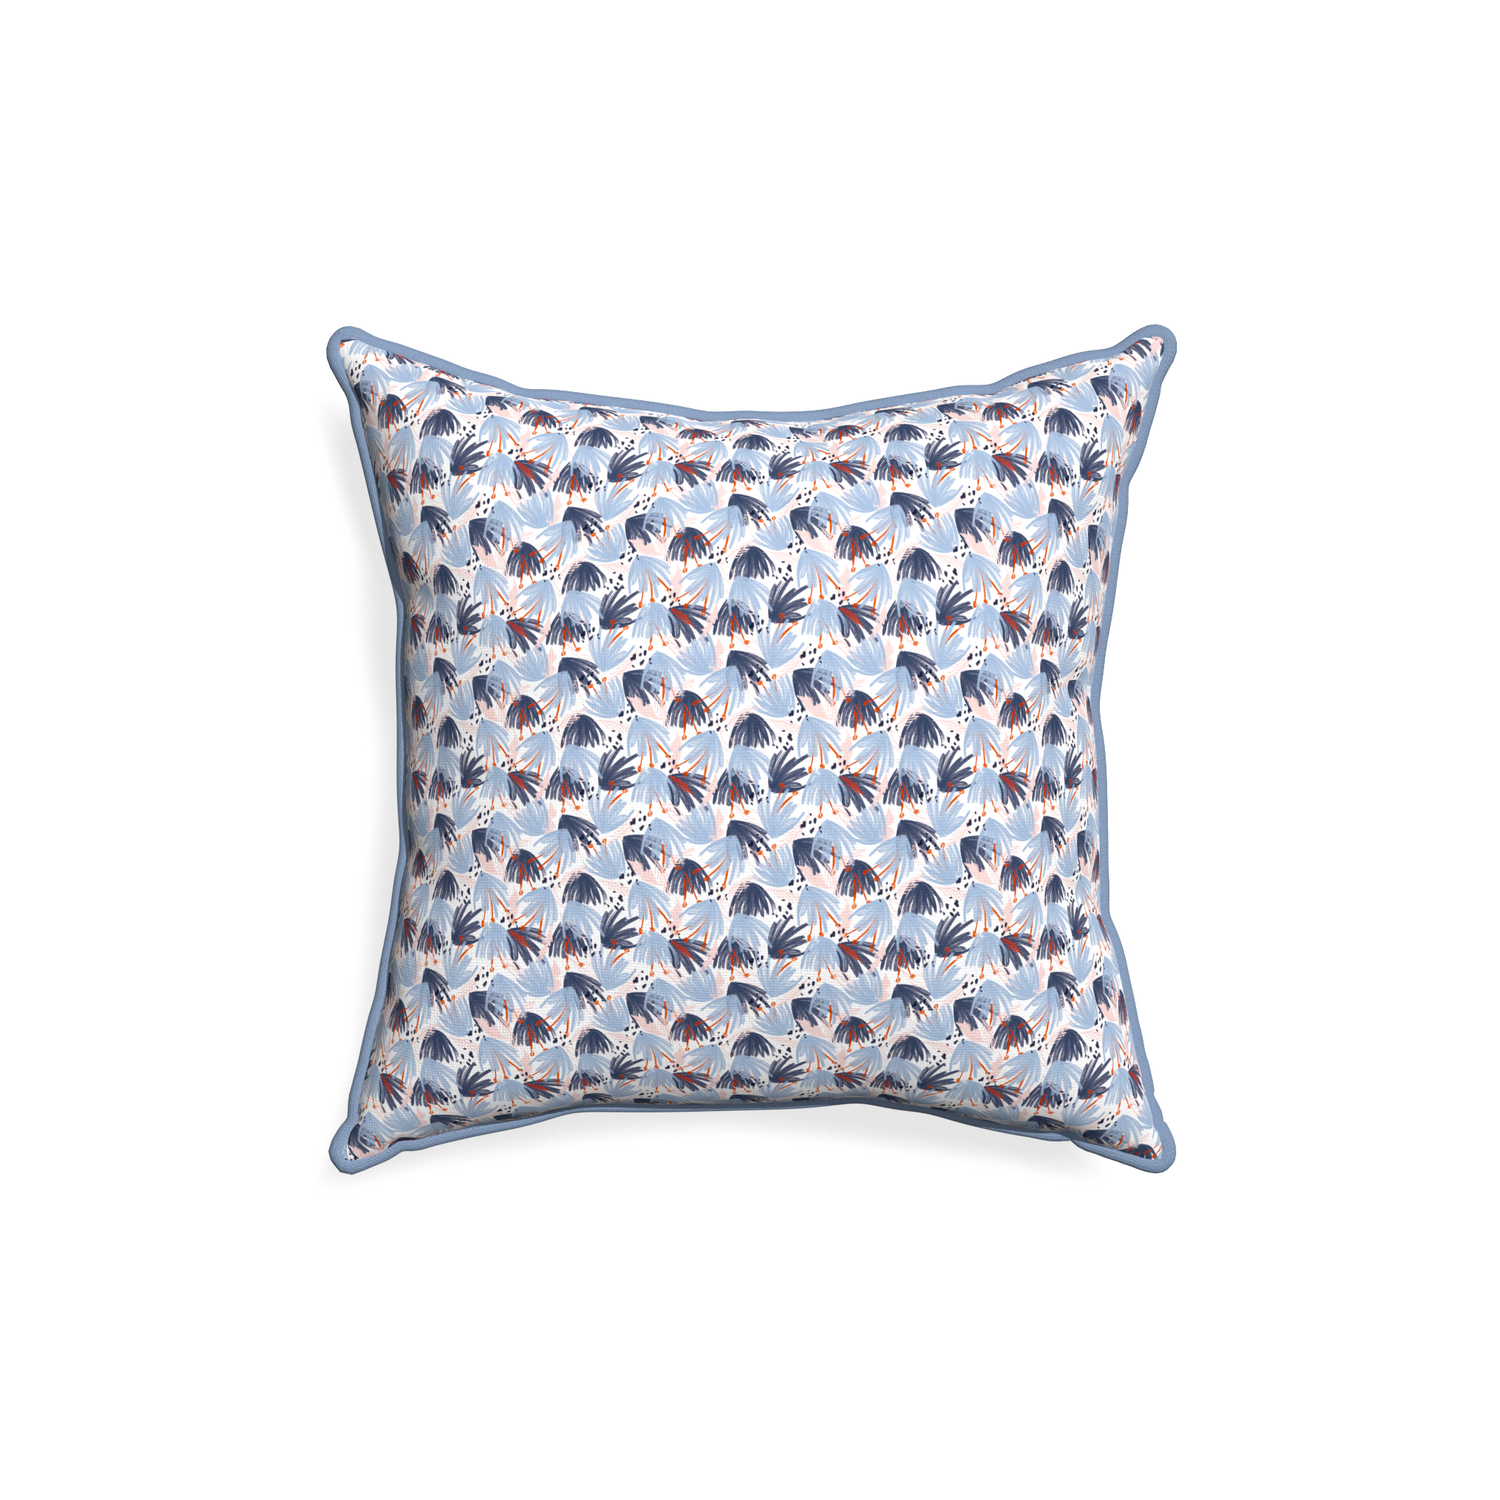 18-square eden blue custom pillow with sky piping on white background